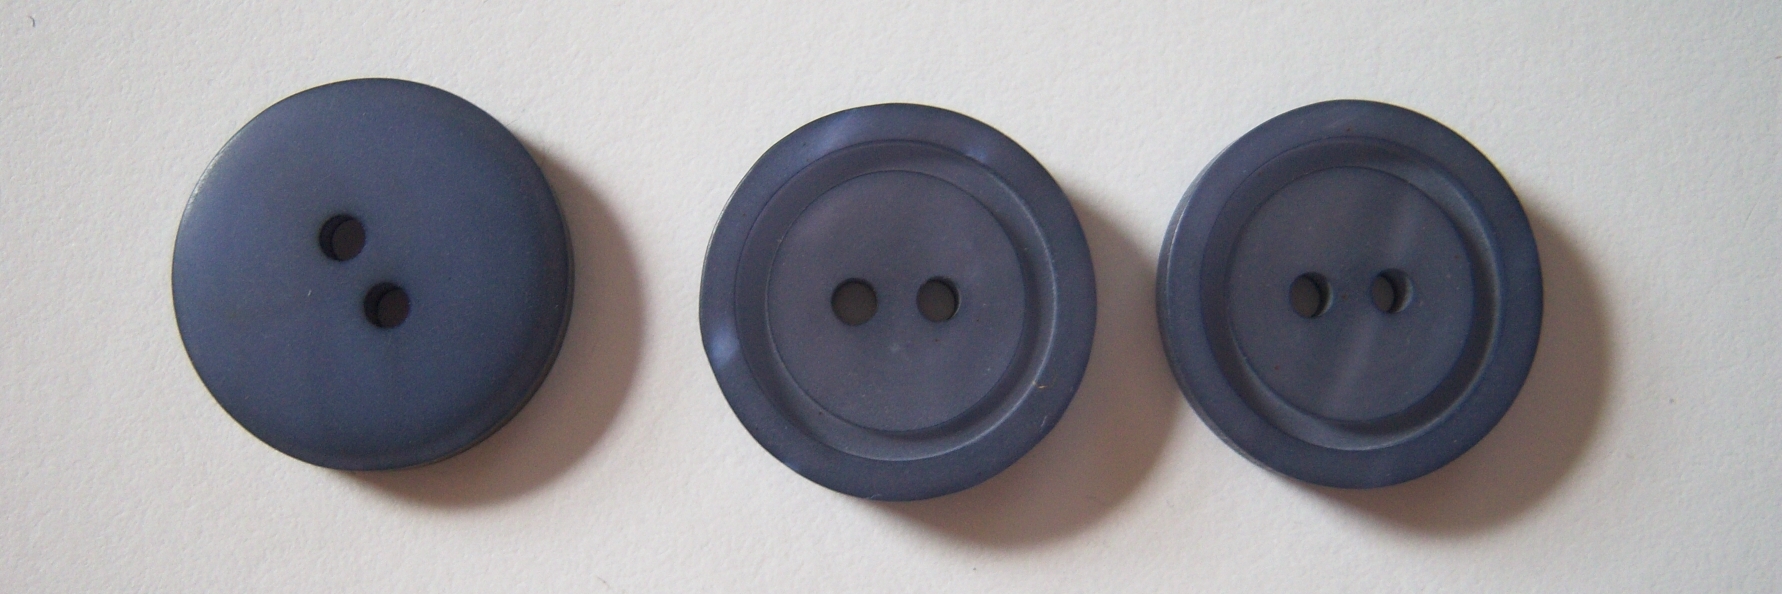 Denim Blue Pearlized 13/16" Poly 2 Hole Button